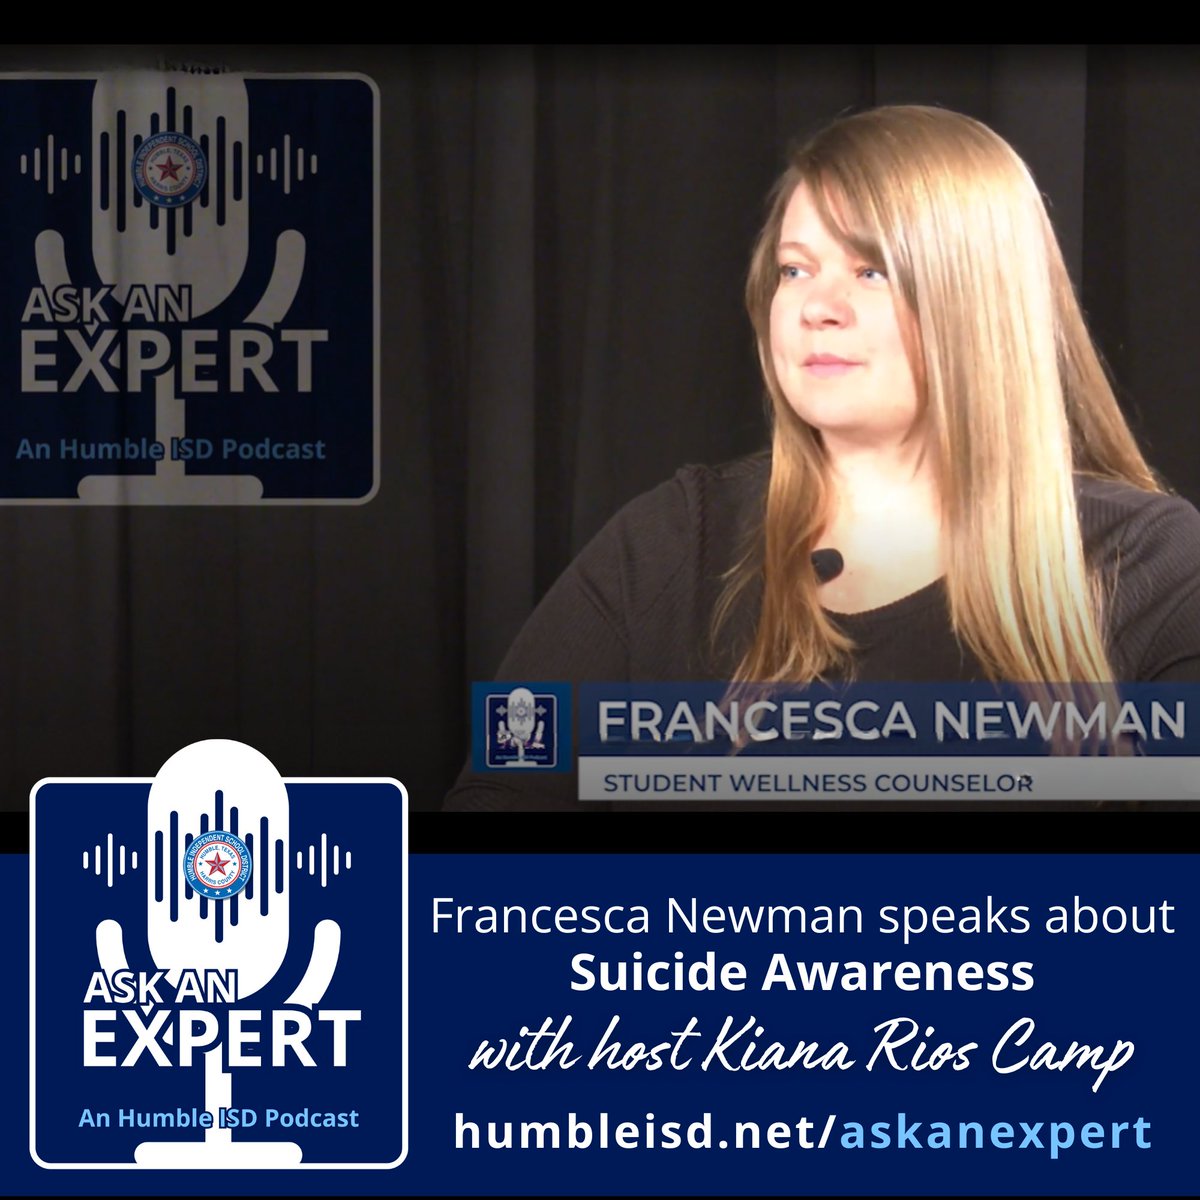 🎙️In Episode 12 of Ask an Expert, Francesca Newman, raises awareness about suicide and shares resources available to those experiencing a crisis. English: bit.ly/3xRmlJJ Spanish: bit.ly/4b7FGod Catch all episodes at humbleisd.net/askanexpert.